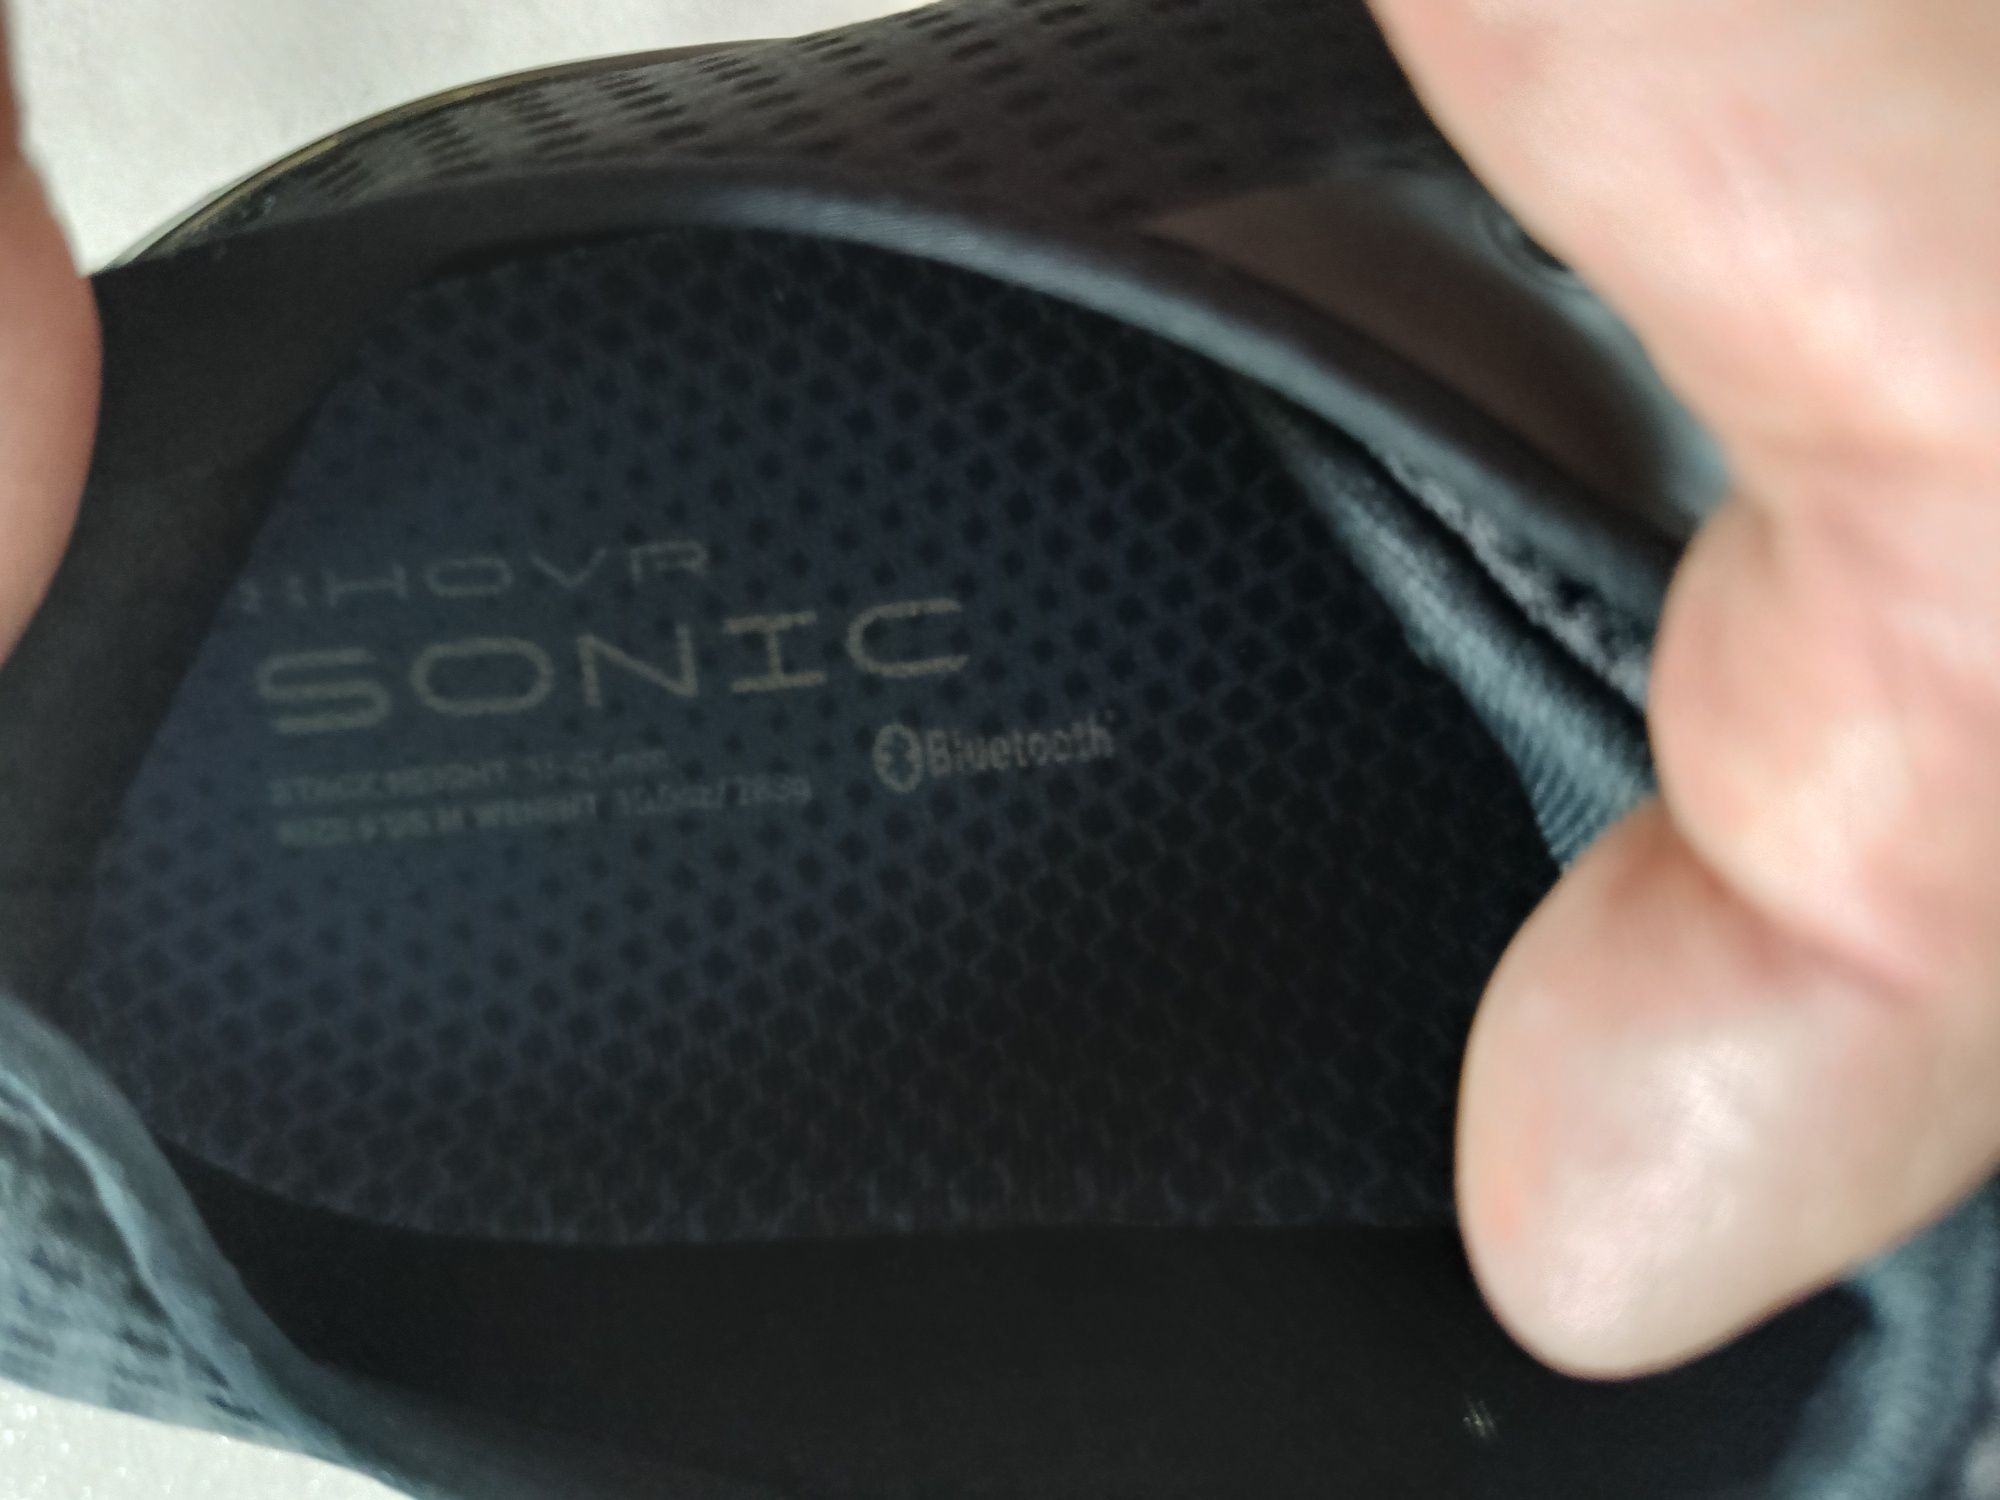 Buty Under Armour Hovr Sonic 2